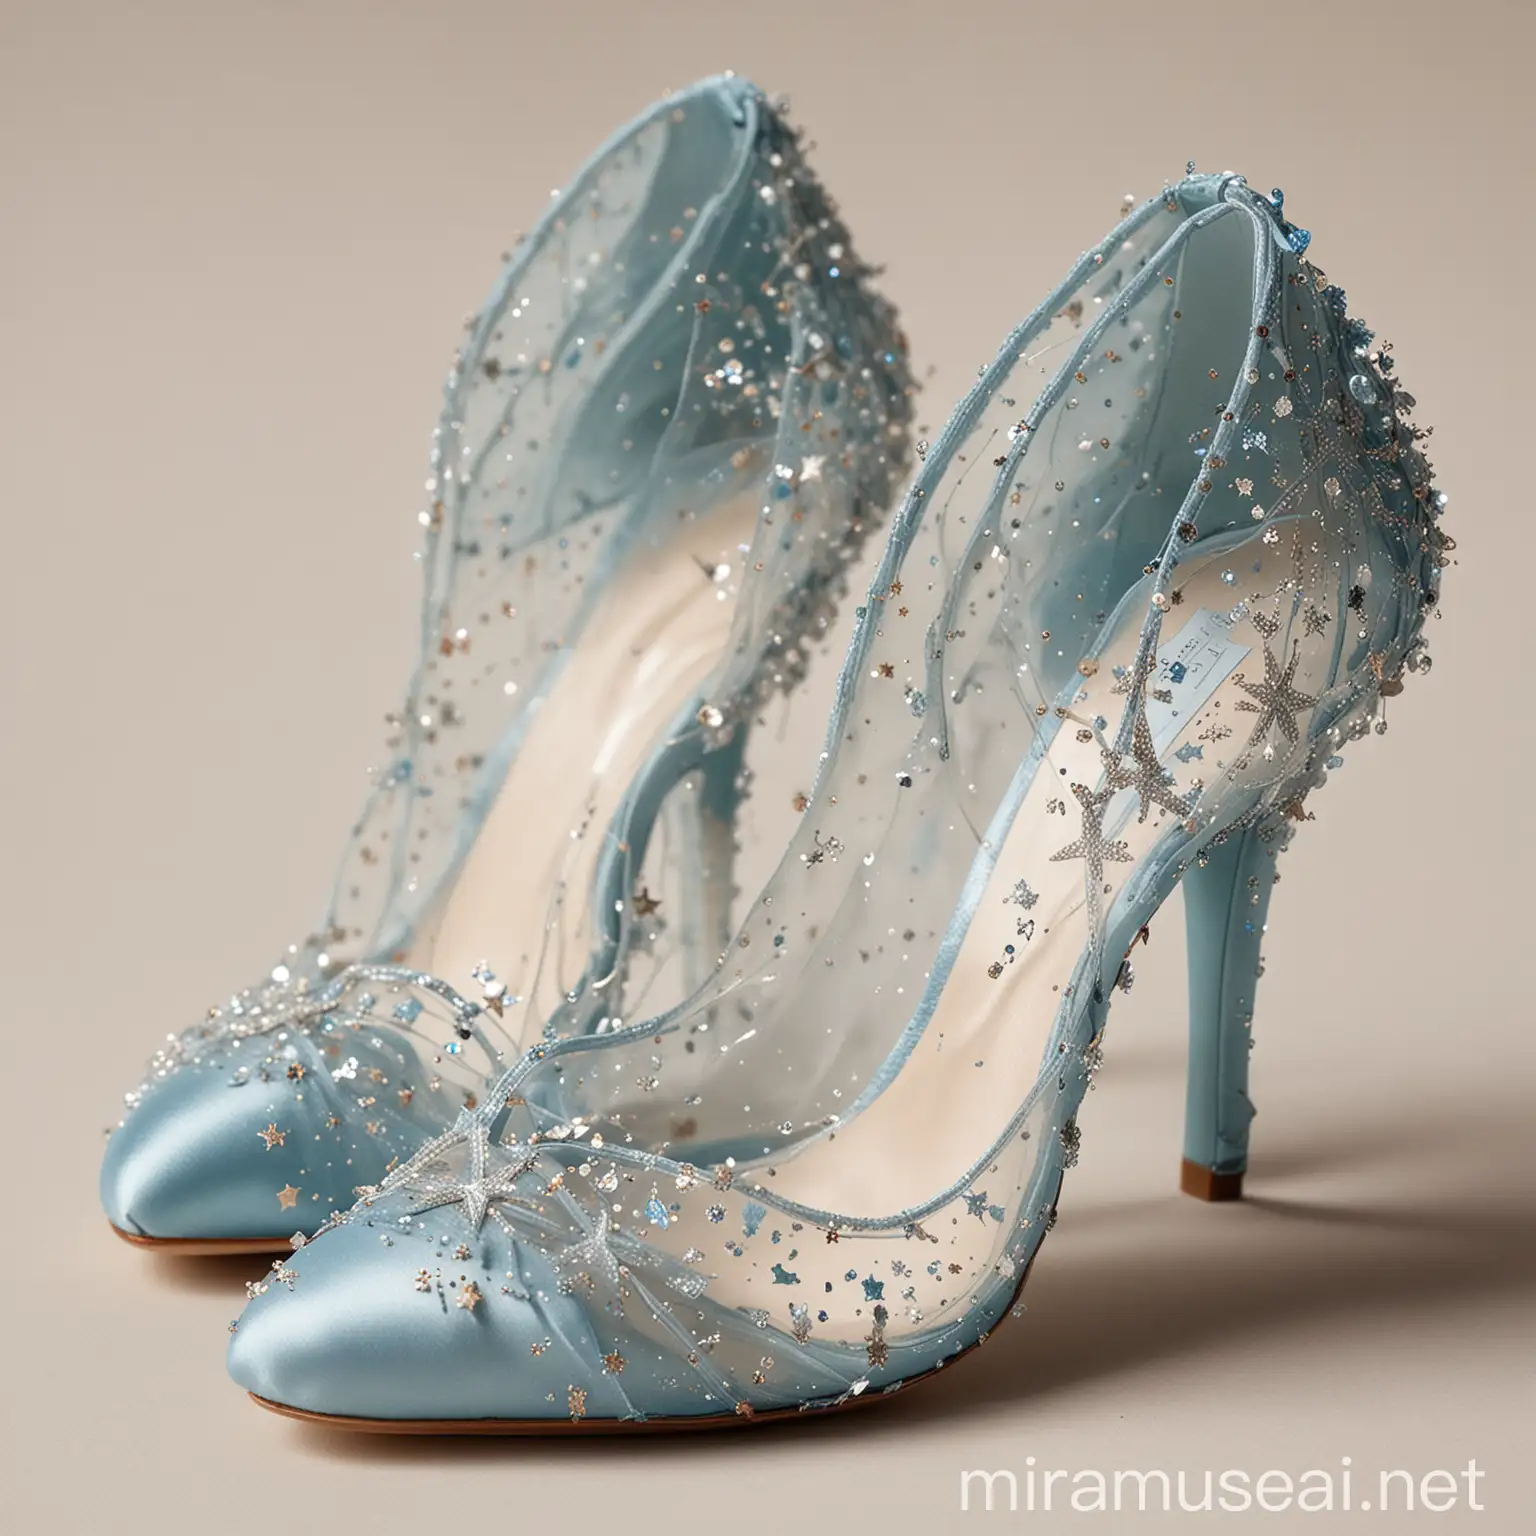 Celestial Sky Blue Shoes with Sparkling Crystal Details